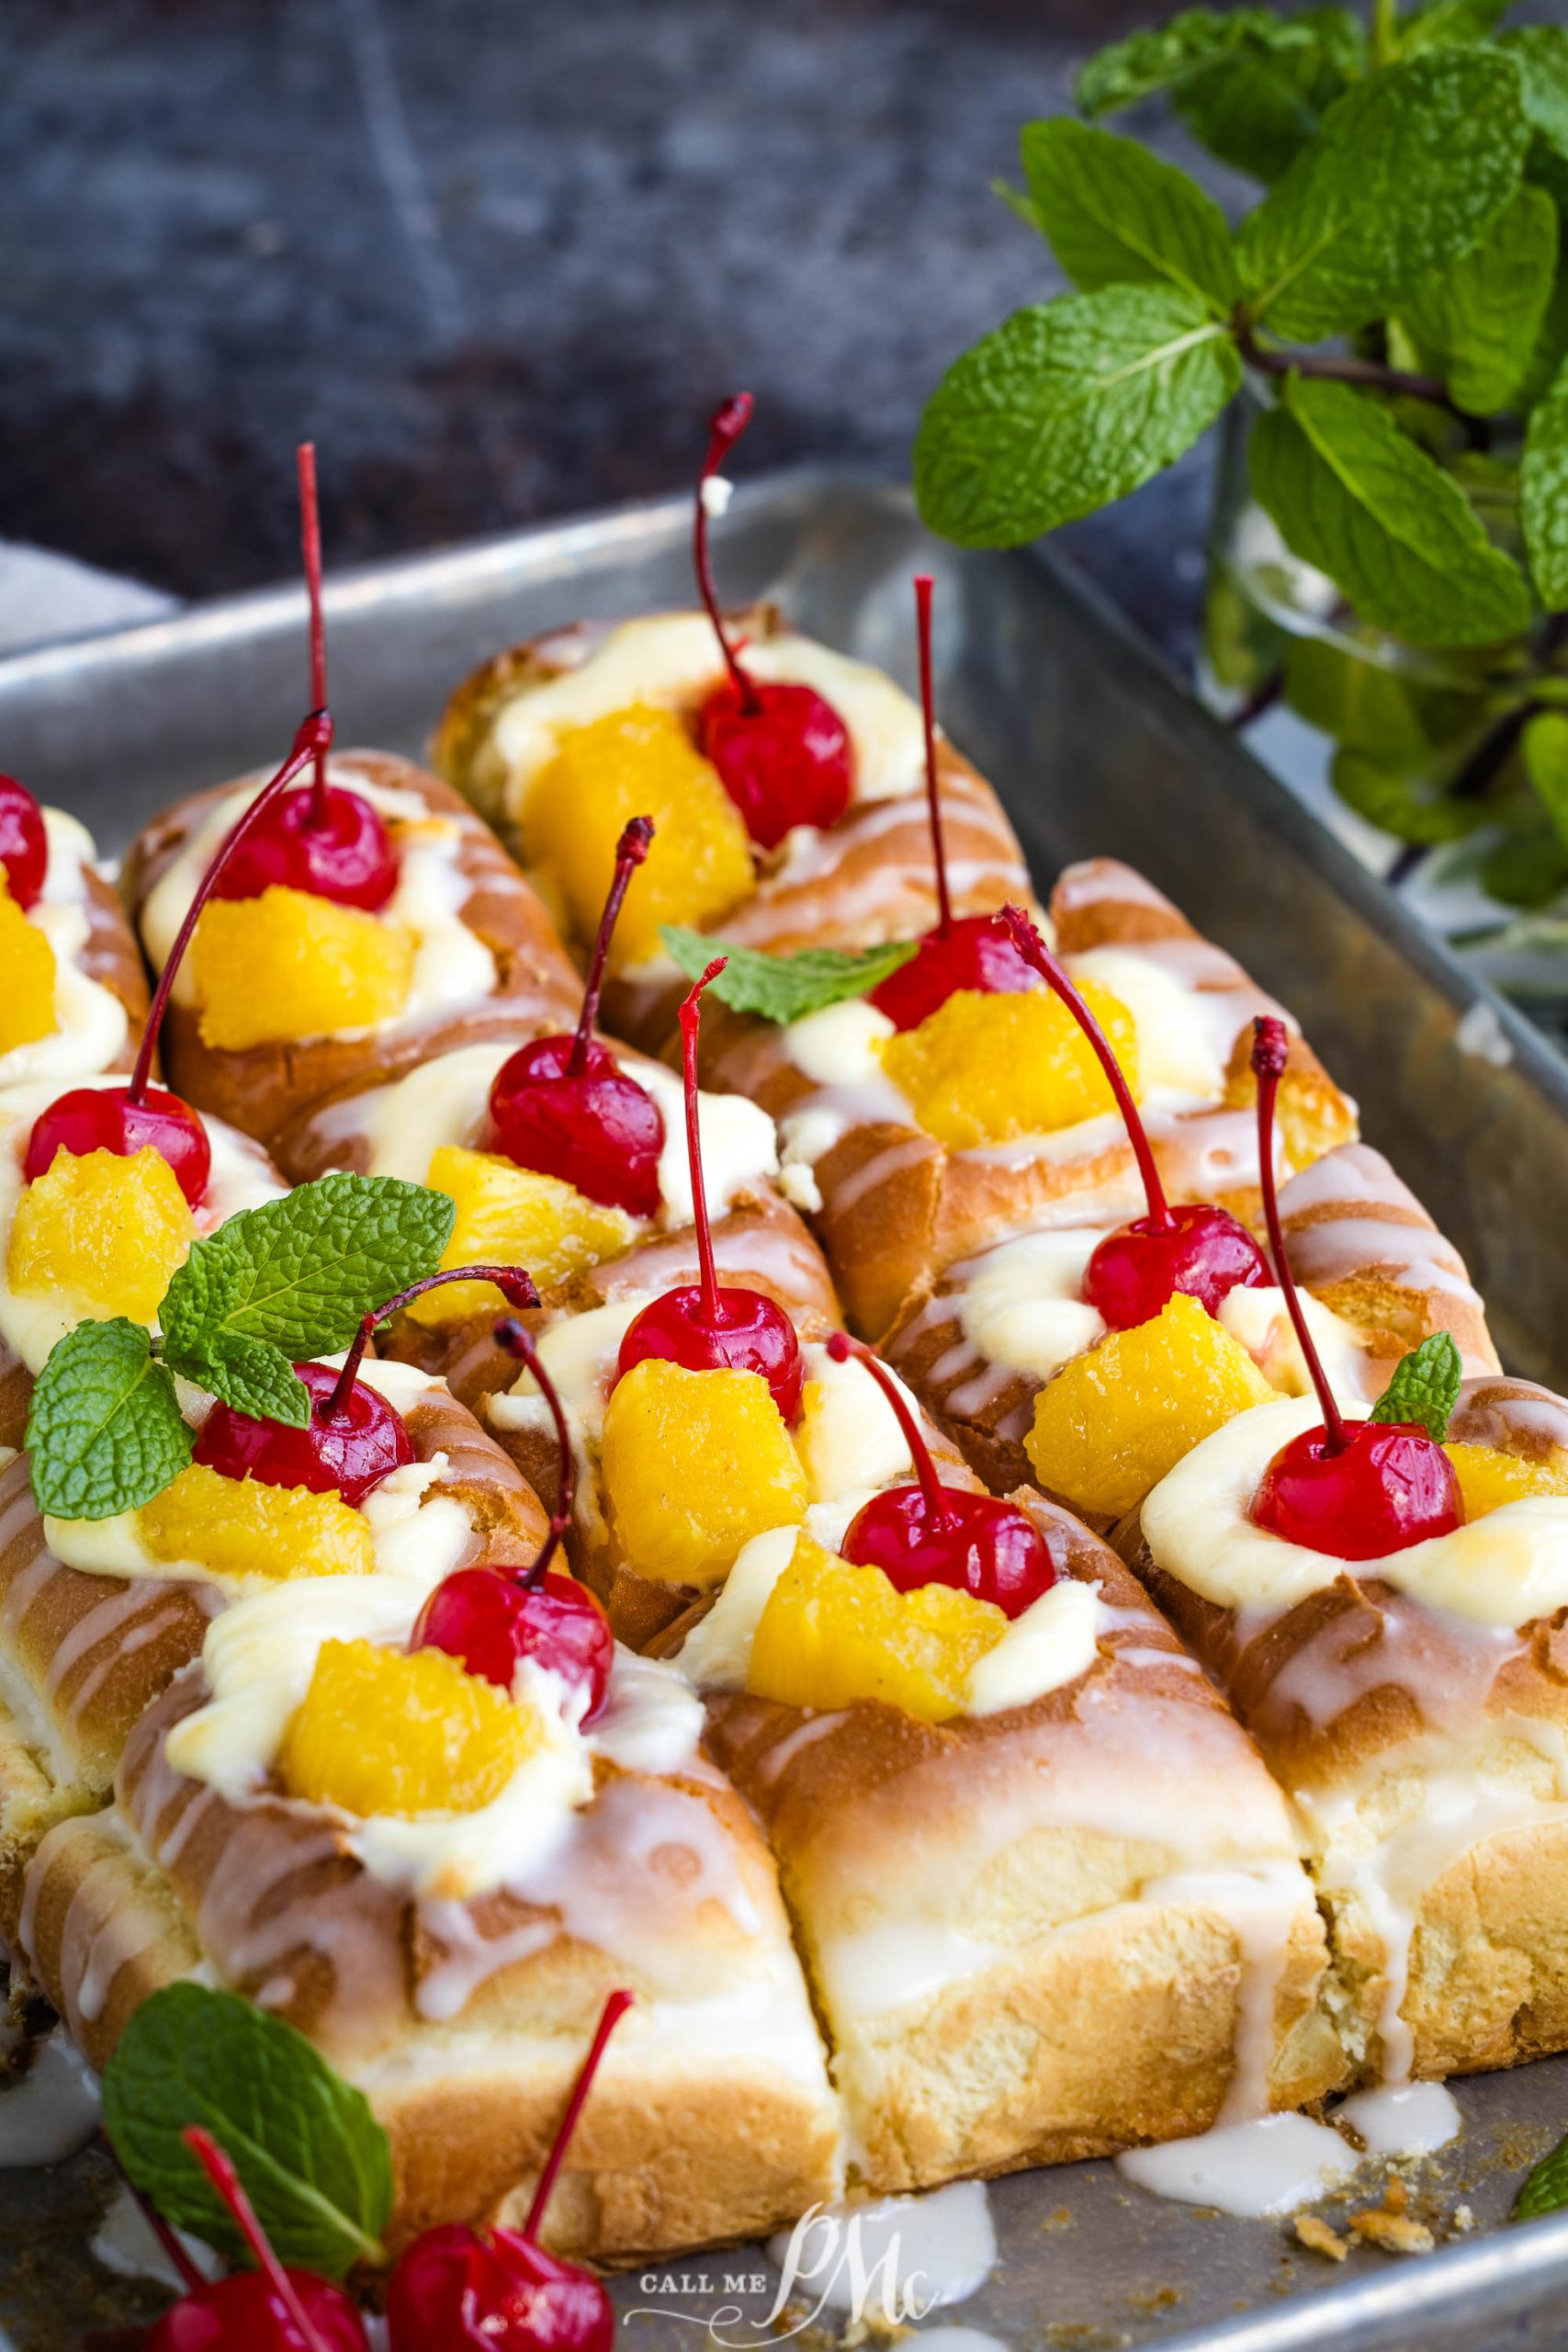 A tray of fruit-topped pastries garnished with mint leaves and cherries.